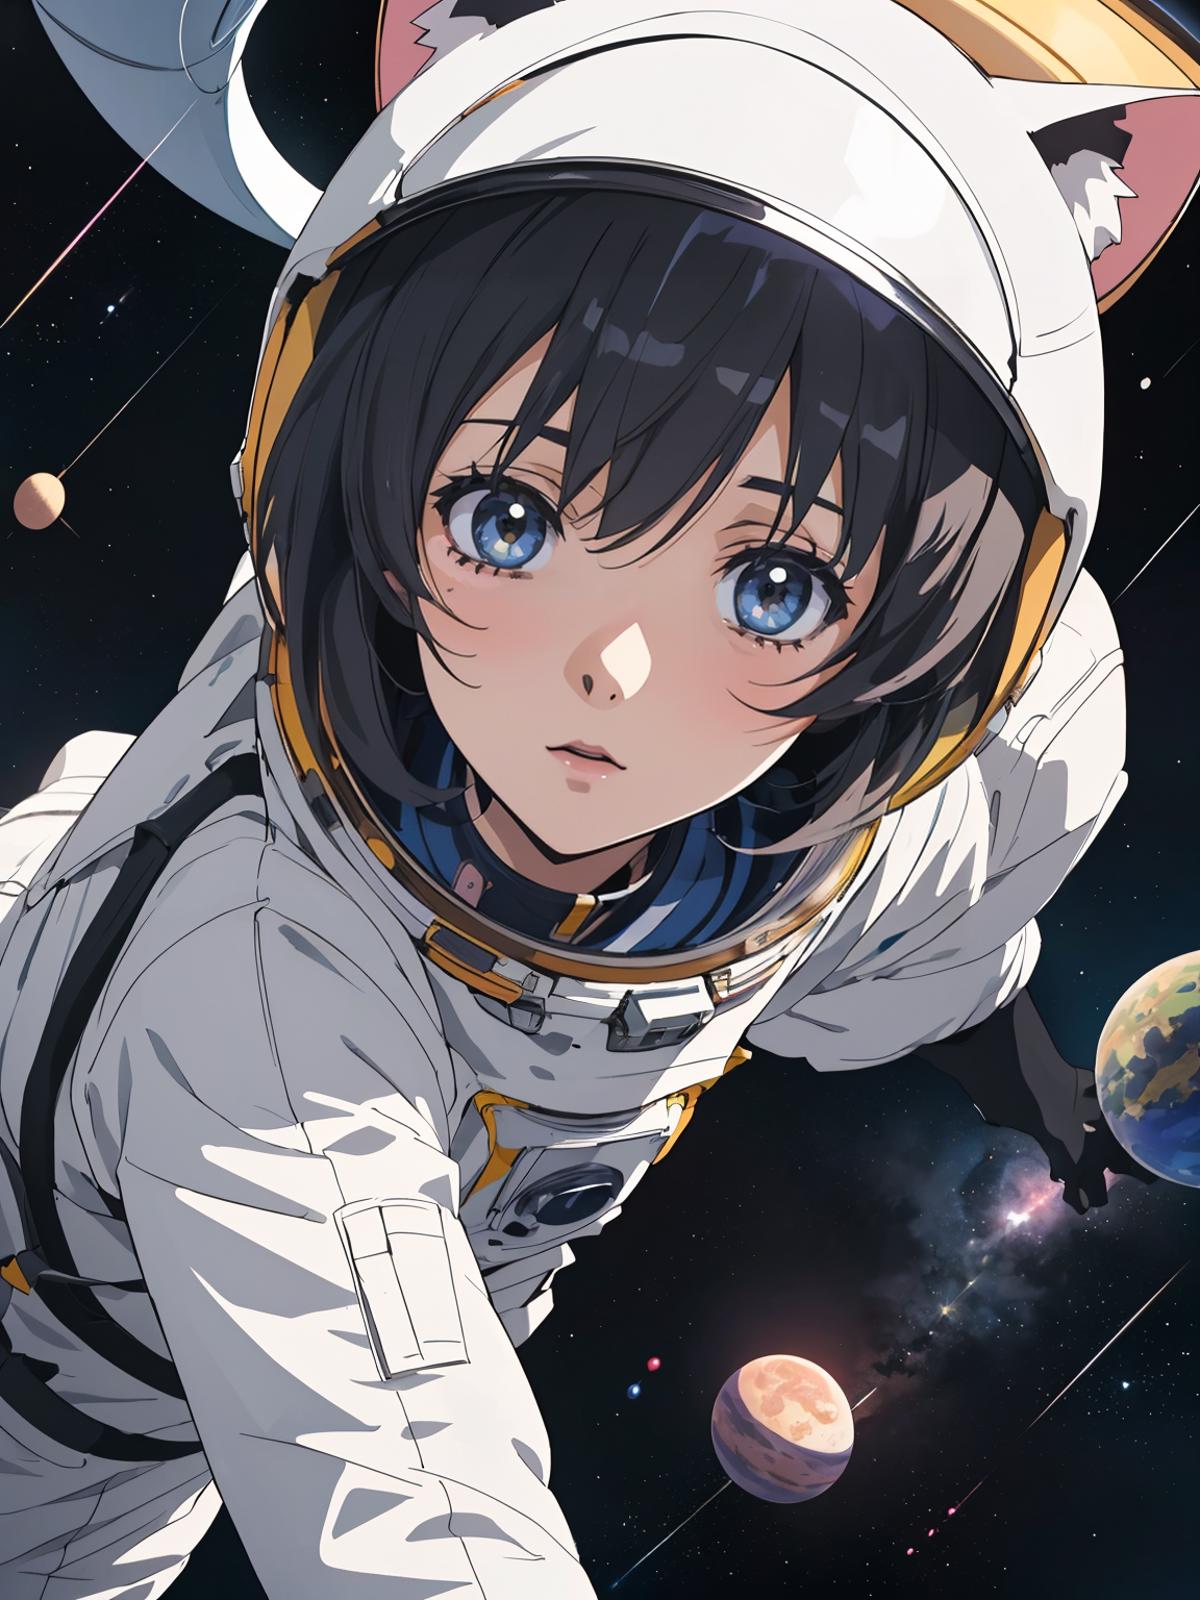 Anime character in a white space suit looking at the camera.